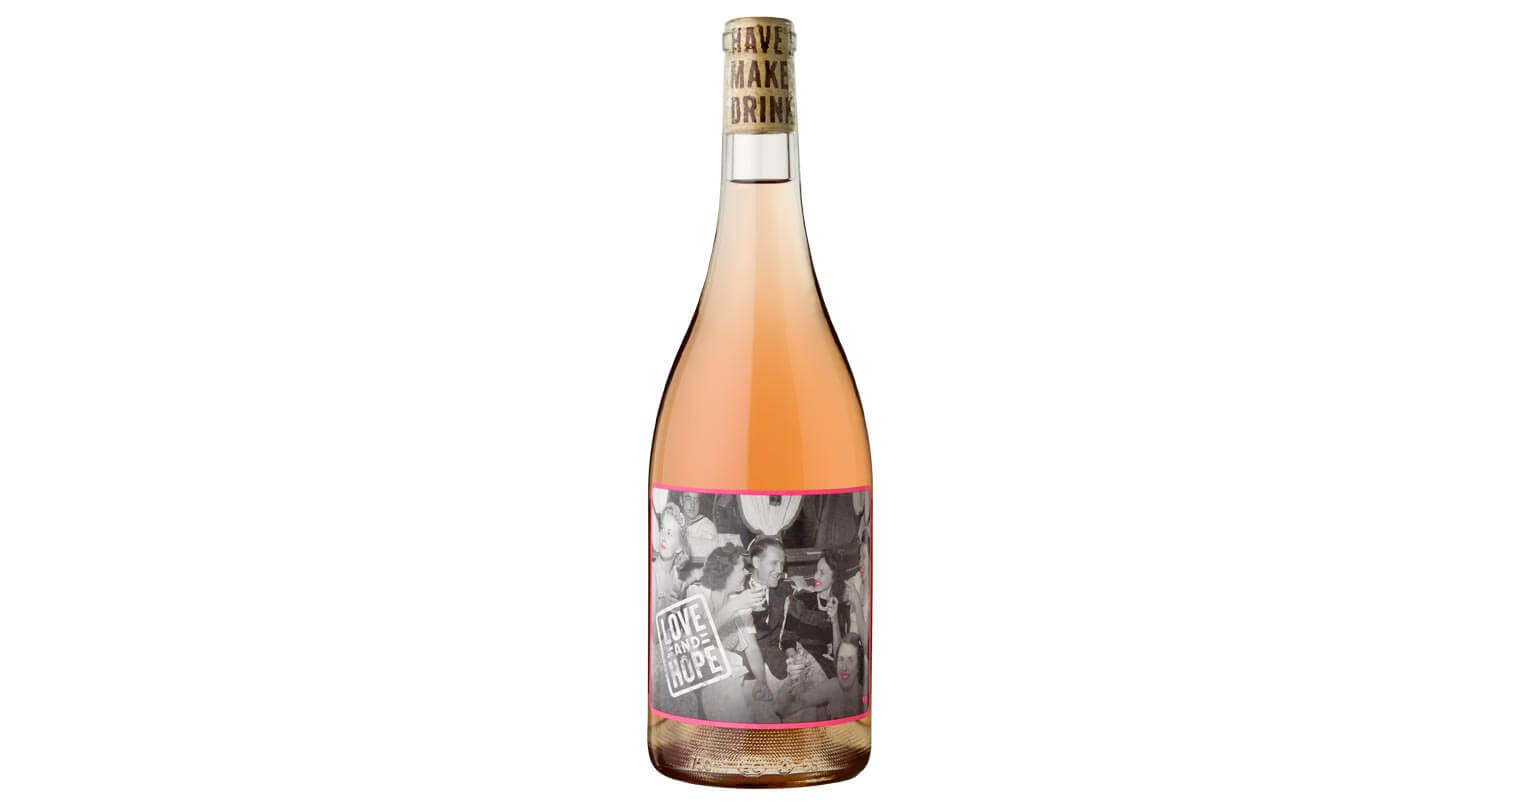 Winemaker Austin Hope and Chef Tim Love Launch a Badass Rosé., wine news, featured image